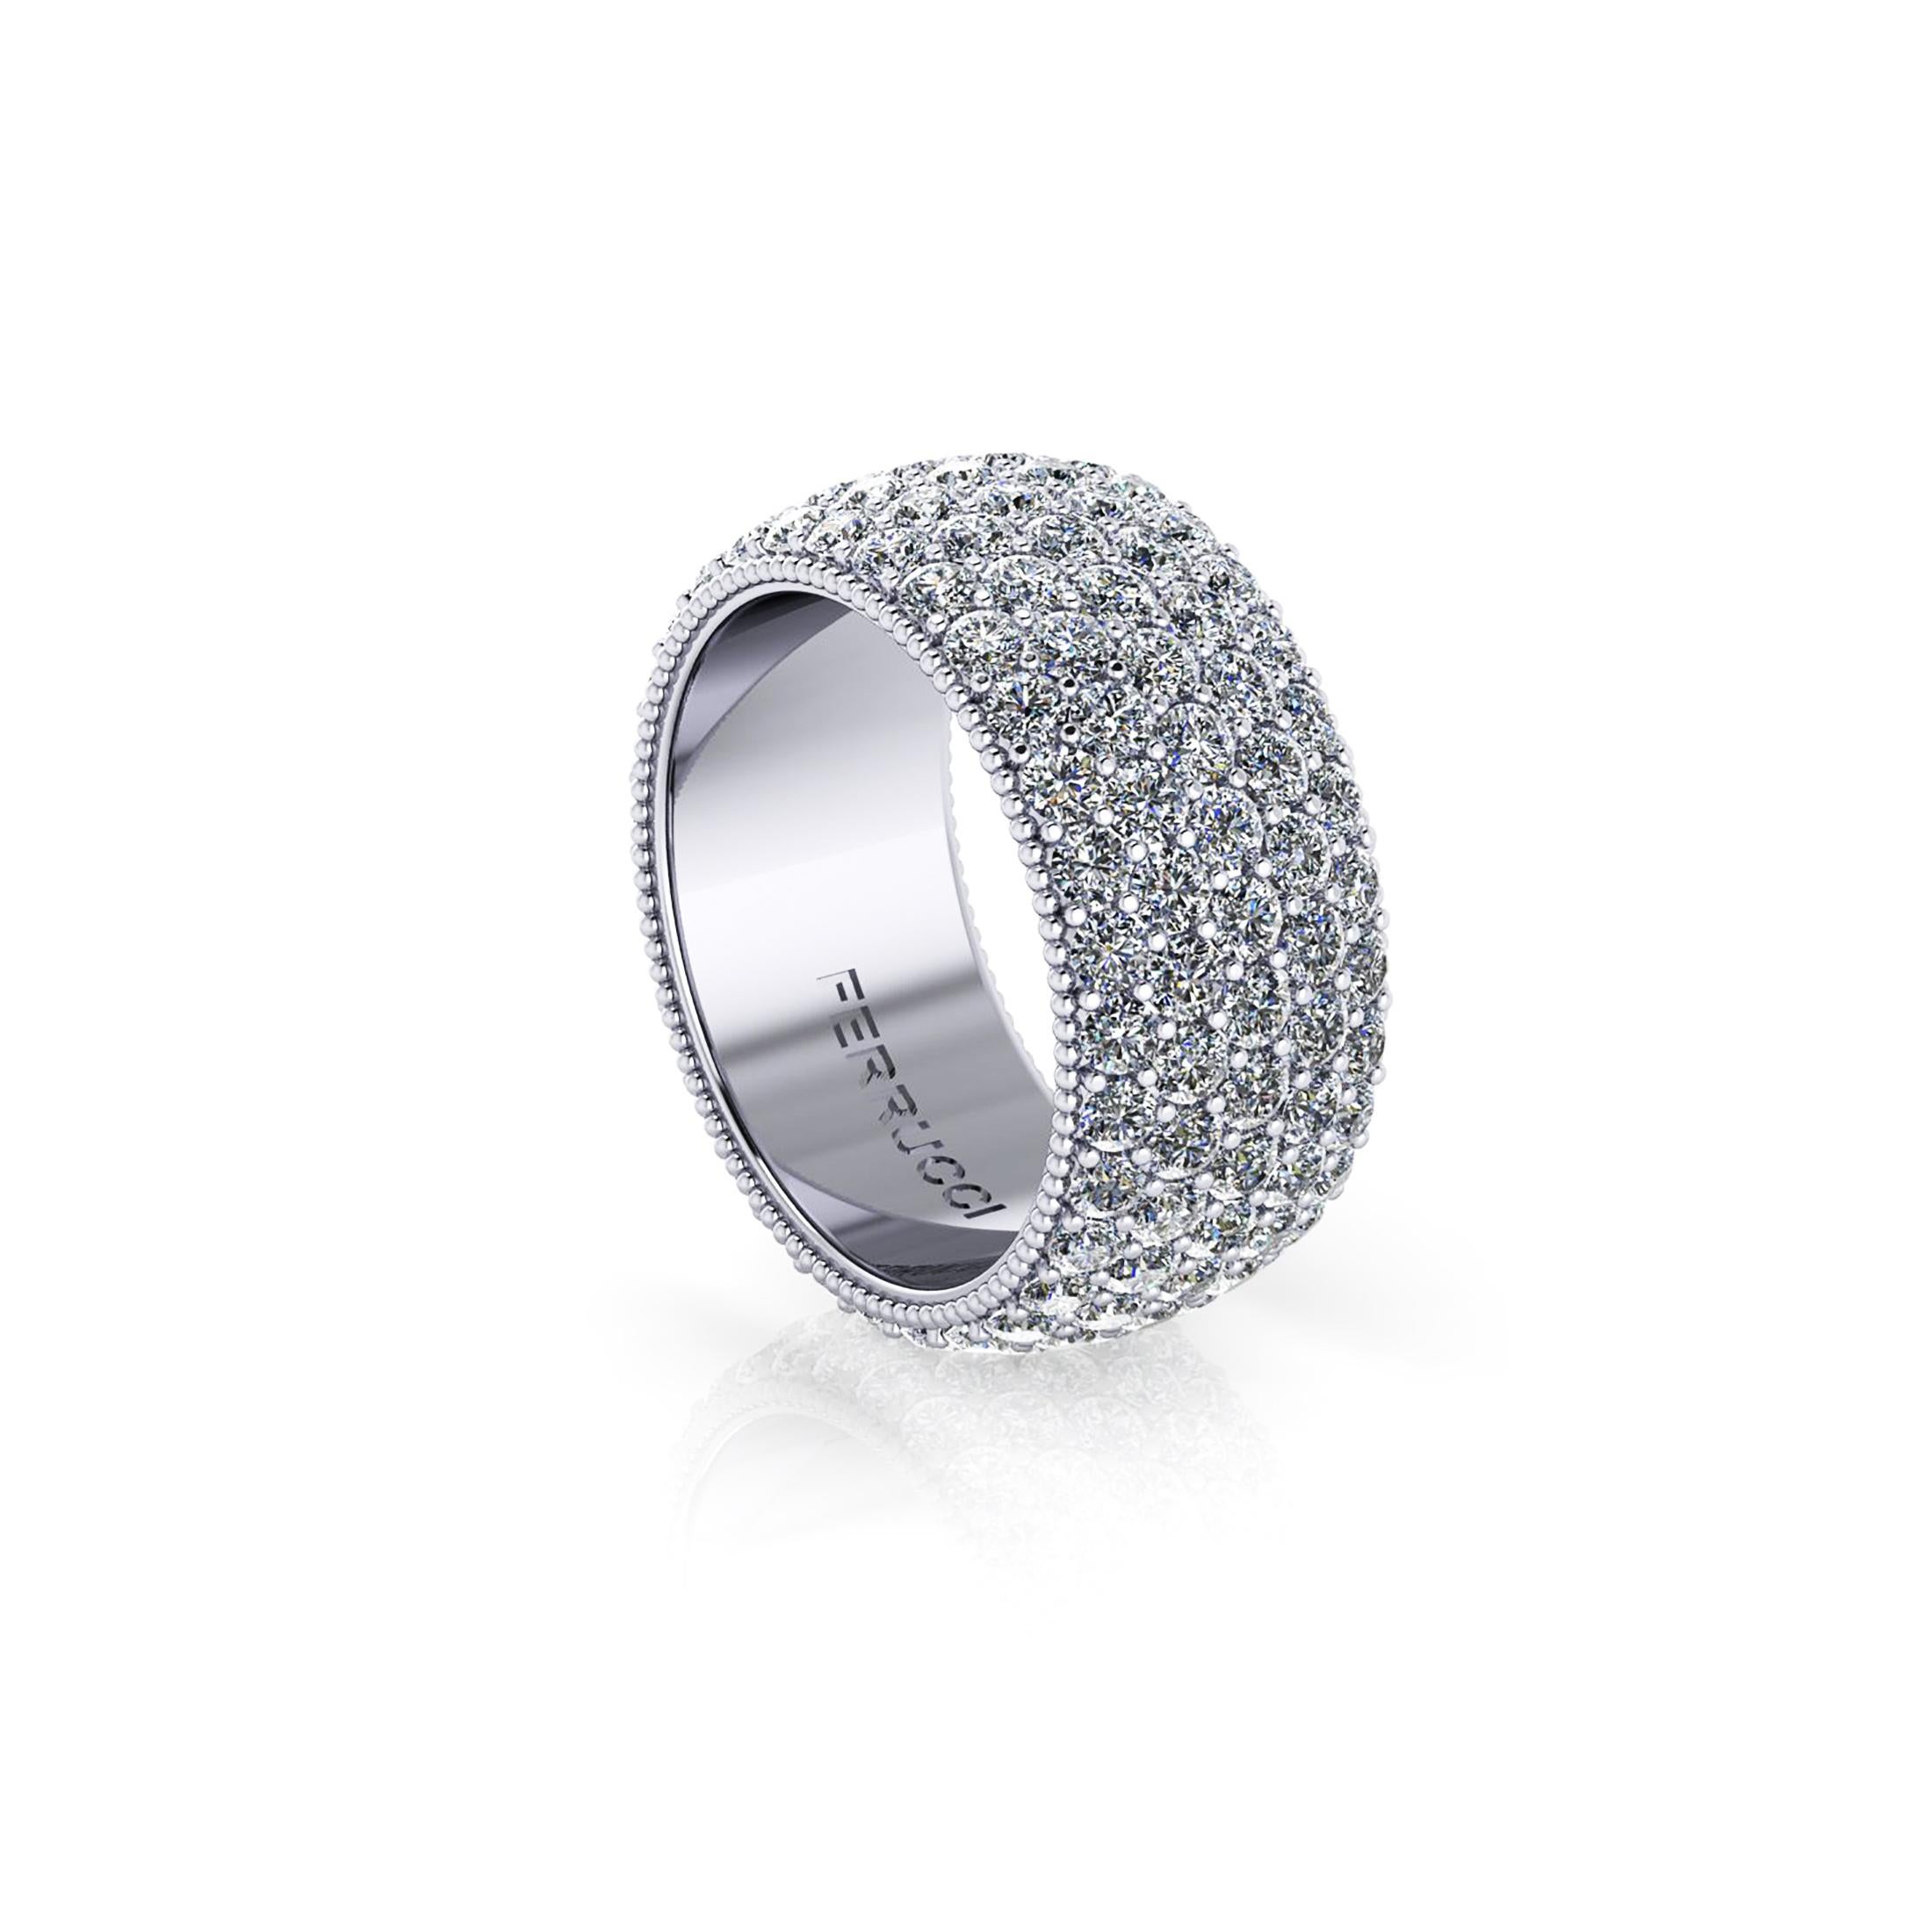 Wide diamond pave' ring, with a slightly dome feeling, a wrap of sparkling white diamonds, G color clarity, VS/SI1 +++ for an approximate total carat weight of 4.70 carats, hand made in New York City by hand by  Italian master jeweler, conceived in